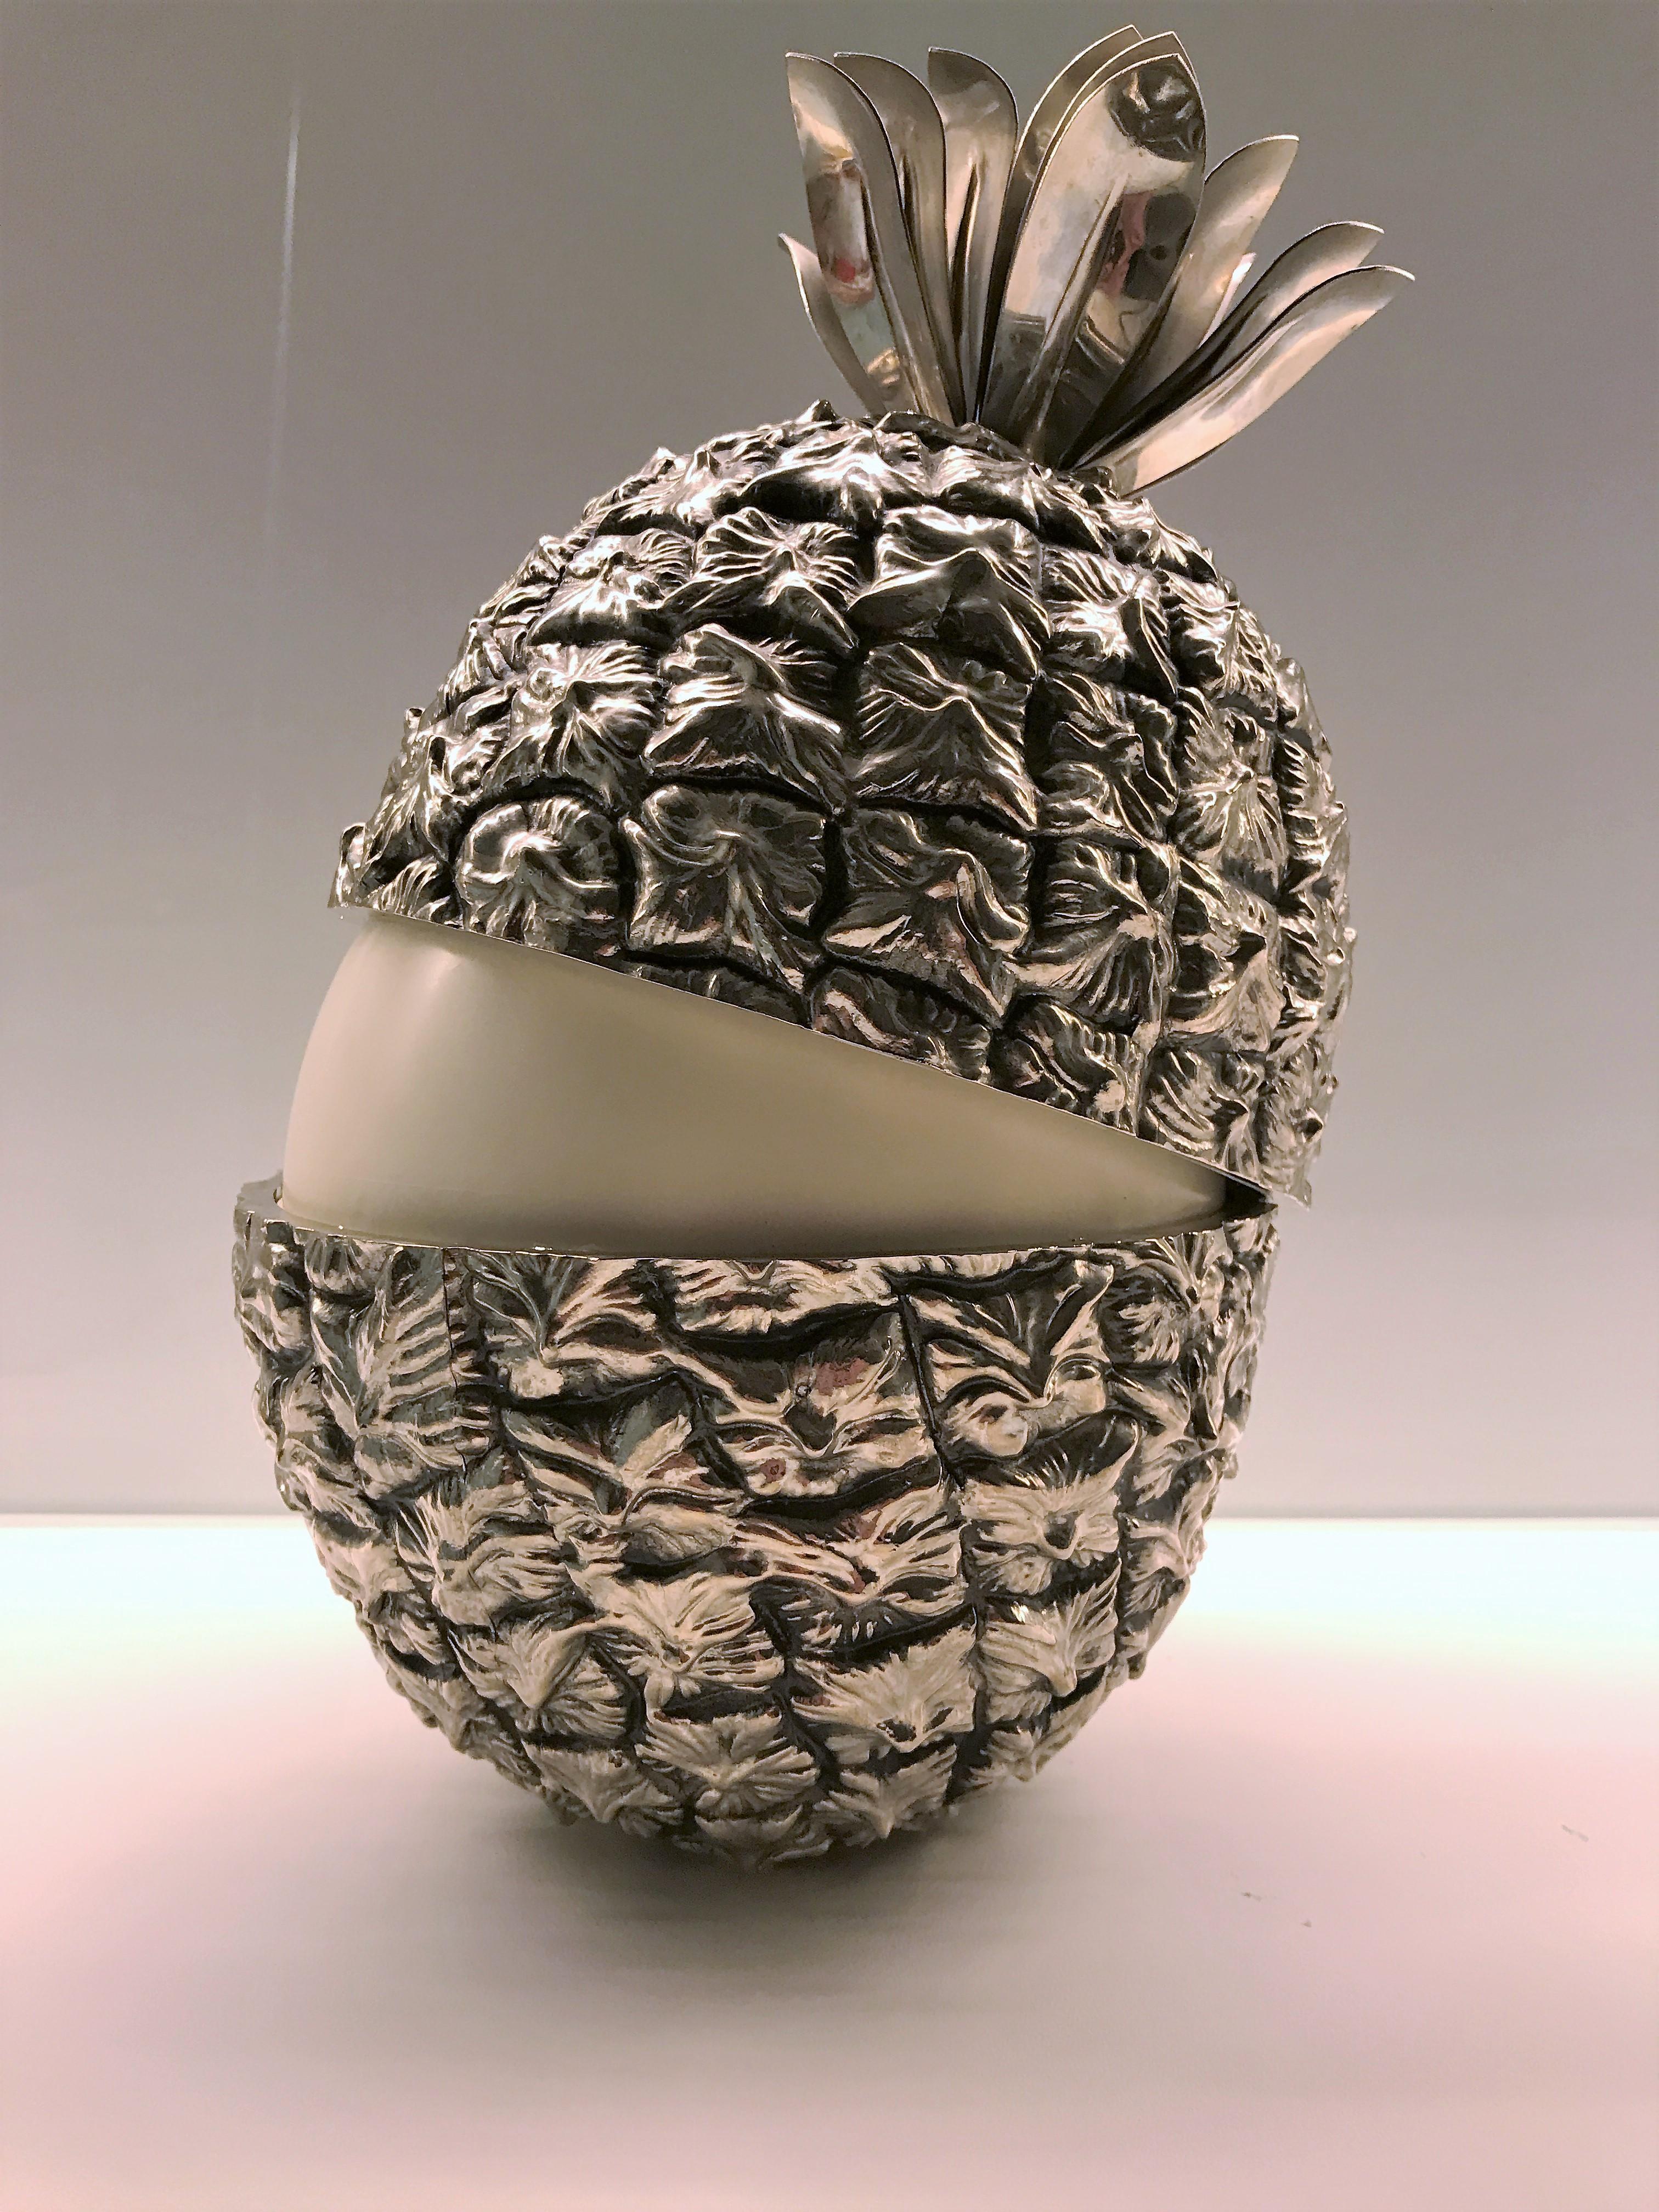 Beautiful pineapple ice bucket designed by Hans Turnwald for Freddo Therm.

This detailed pineapple like ice bucket is a beautiful luxurious appeal add-on for you bar, or as a decoration piece.

Very good condition, labeled on the